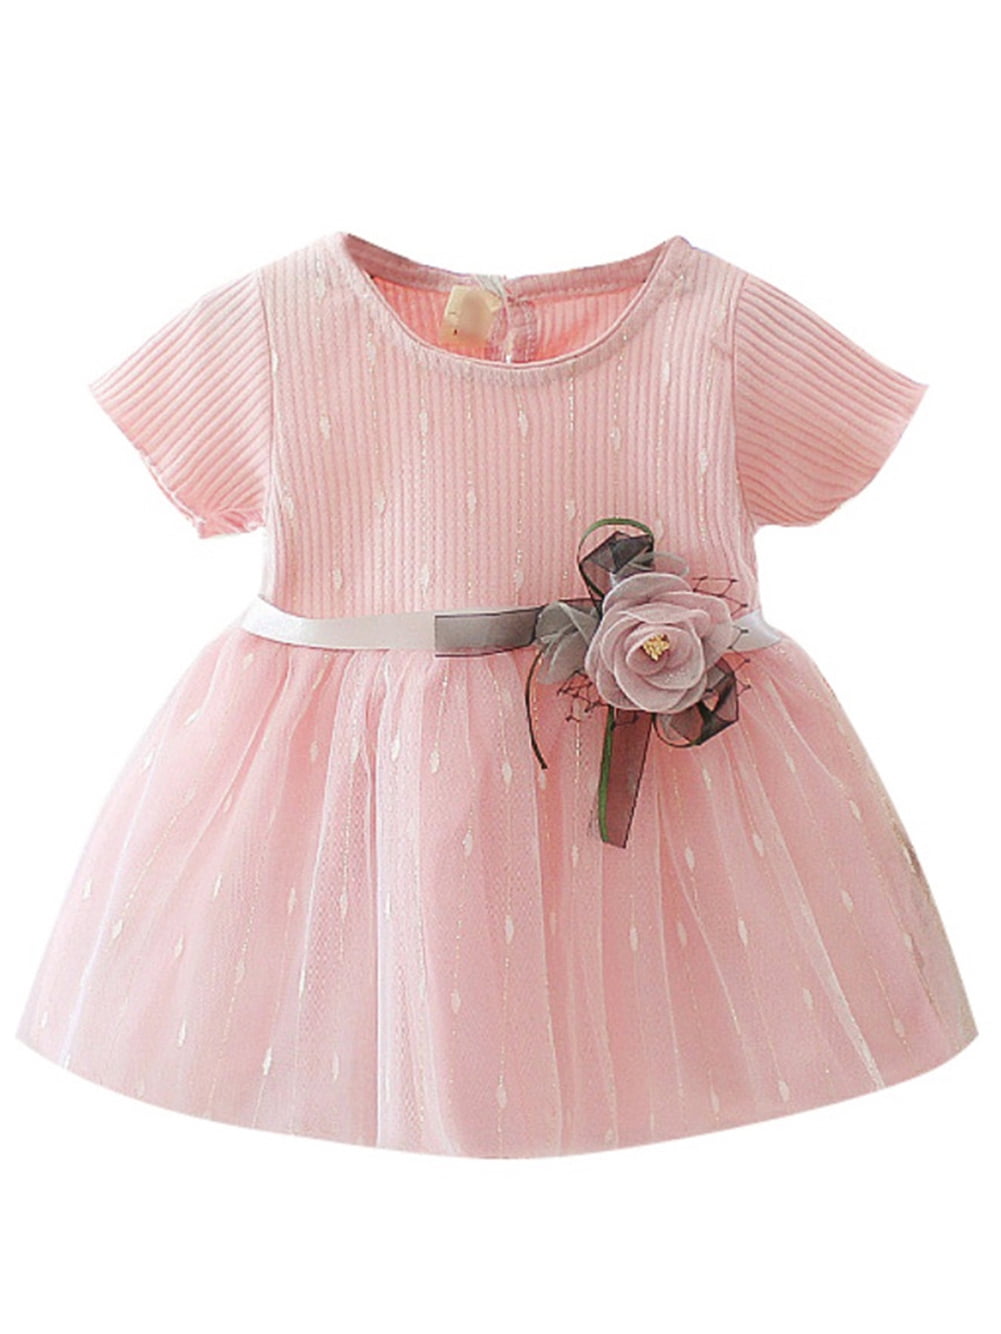 1pc Girl Kids Children Baby Stripe Dress Tutu Clothing Outfit 2-7 Years 